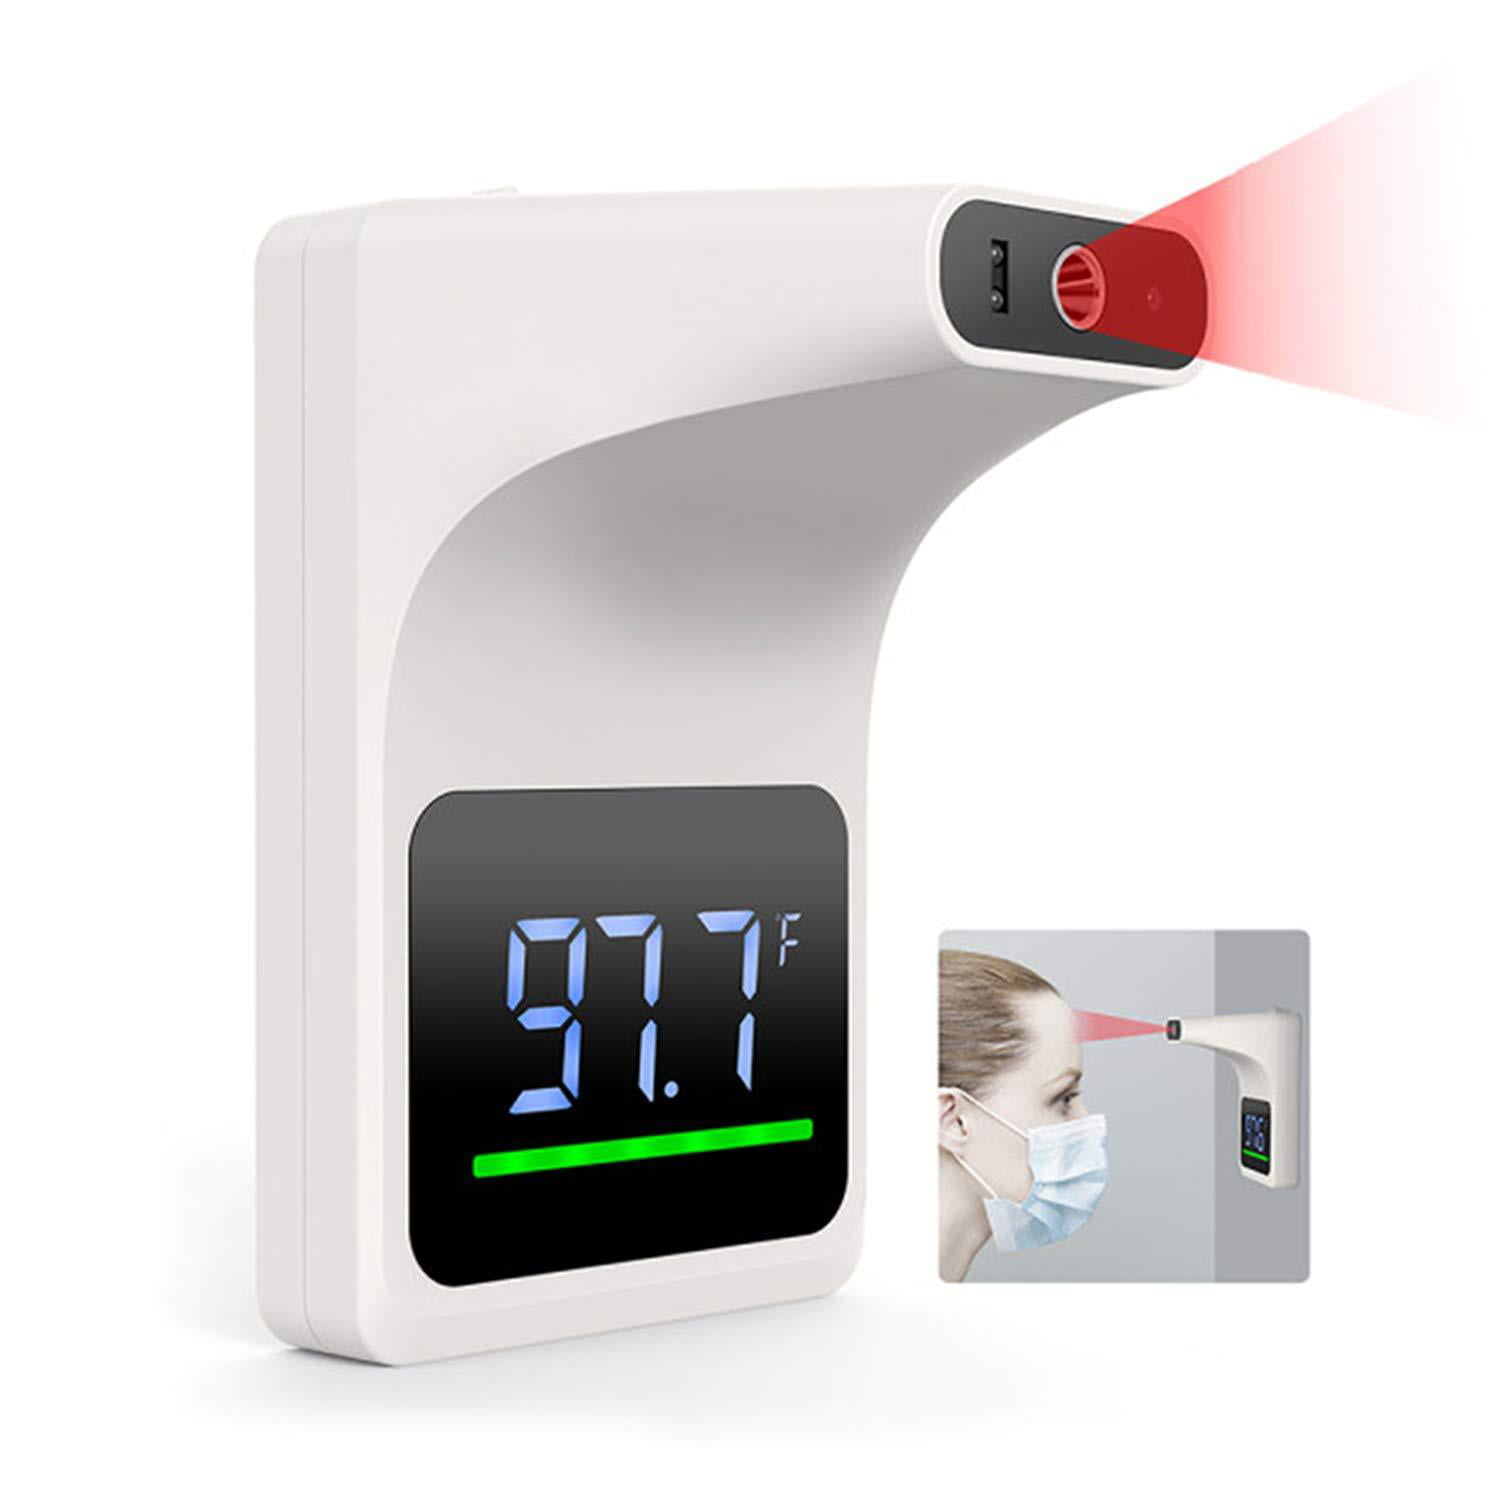 Wall-Mounted Infrared Thermometer with Voice... Details about   XimBro Wall Mounted Thermometer